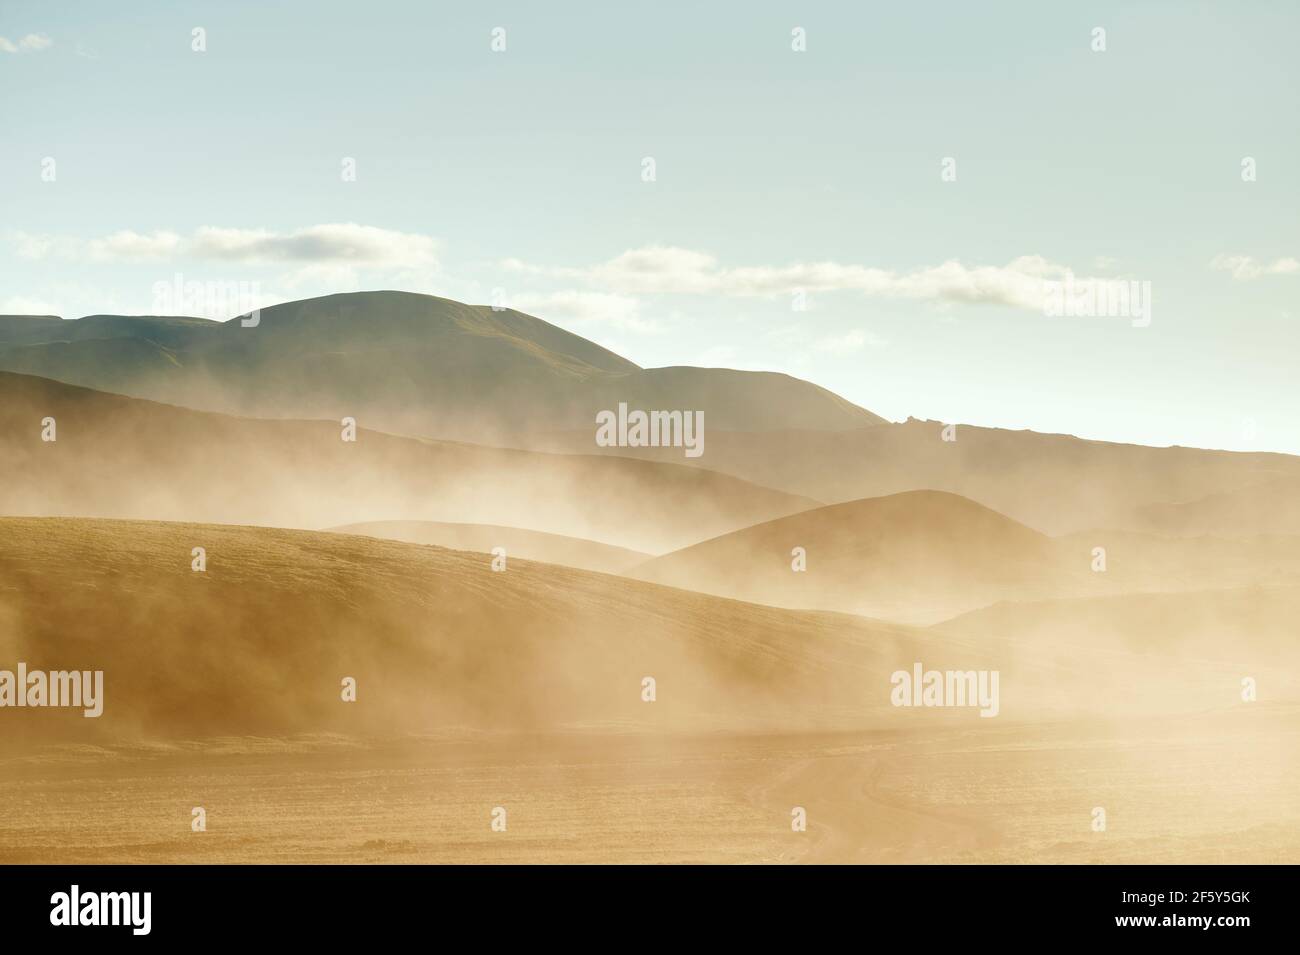 Dust storm in hilly terrain Stock Photo